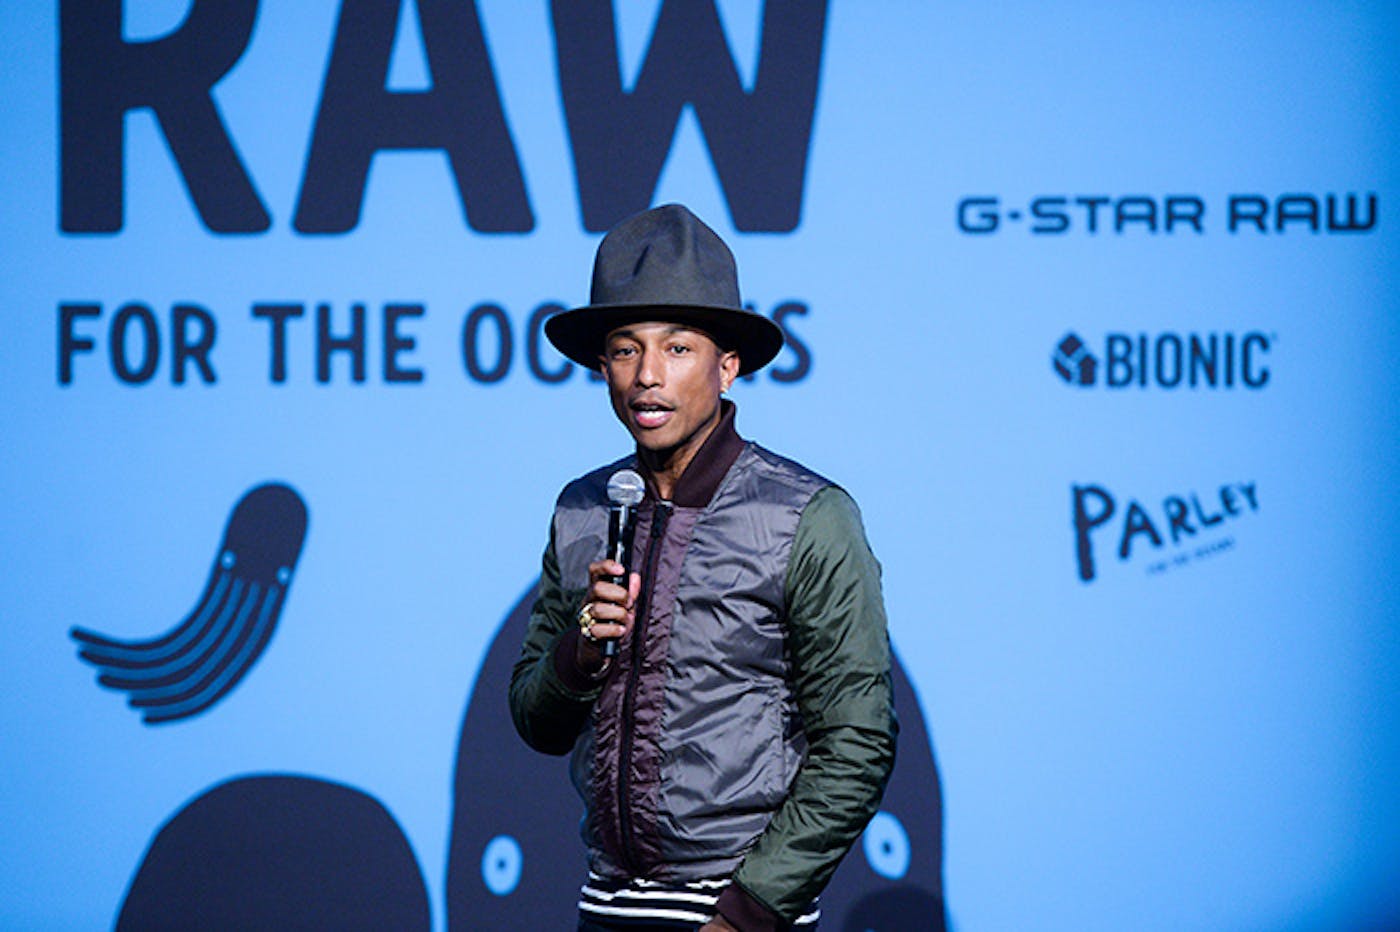 Pharrell Williams at the Raw for Oceans launch